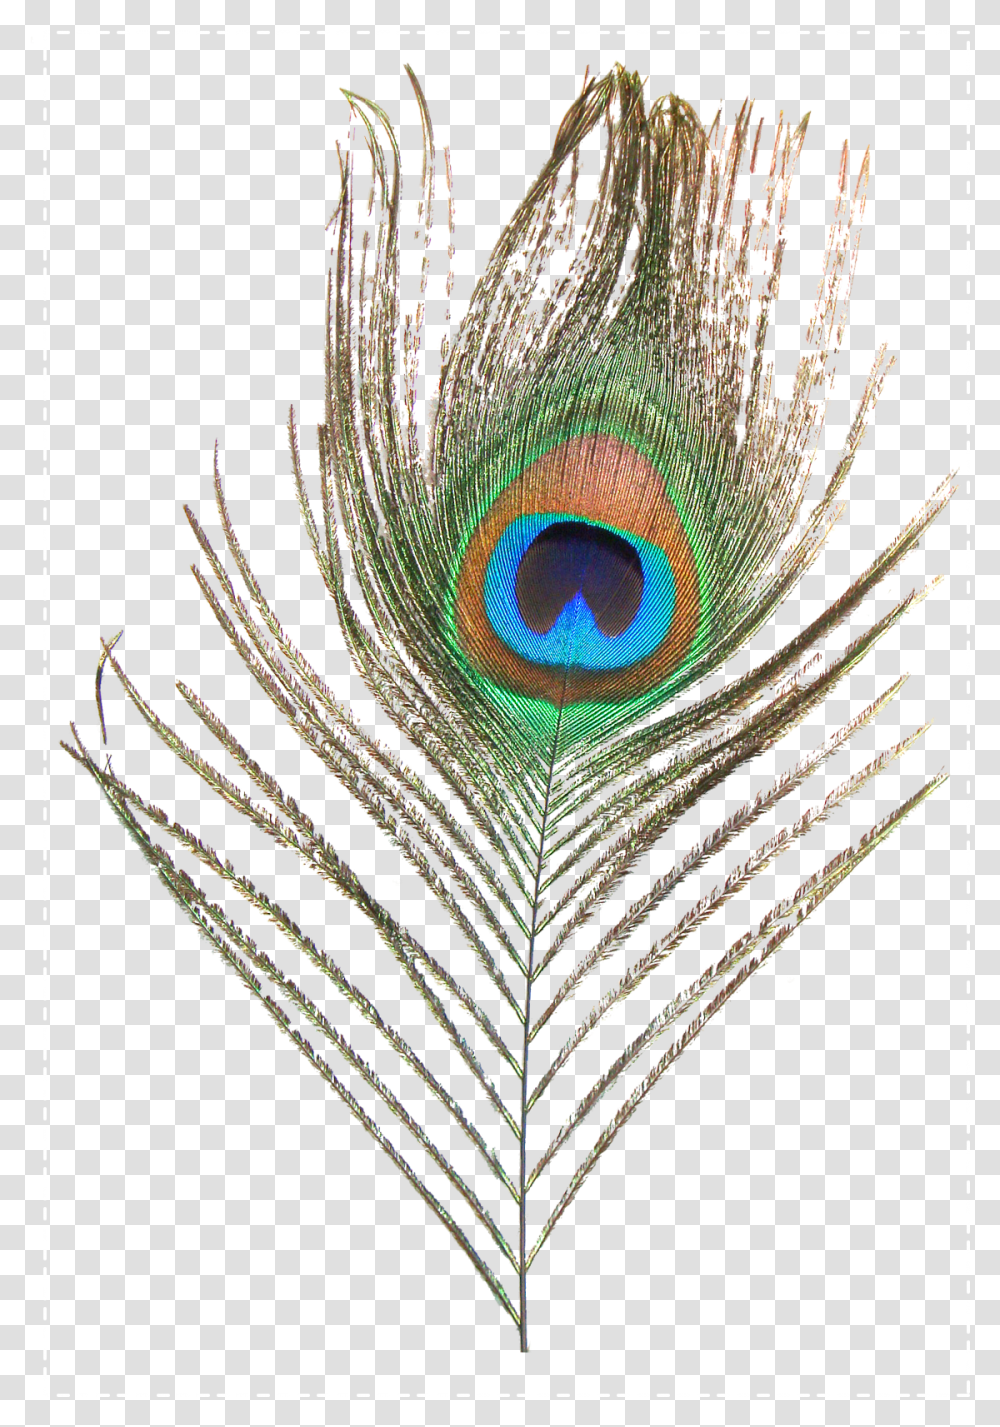 Feather Peafowl Clip Art Peacock Feather Images, Animal, Bird, Invertebrate, Spider Web Transparent Png